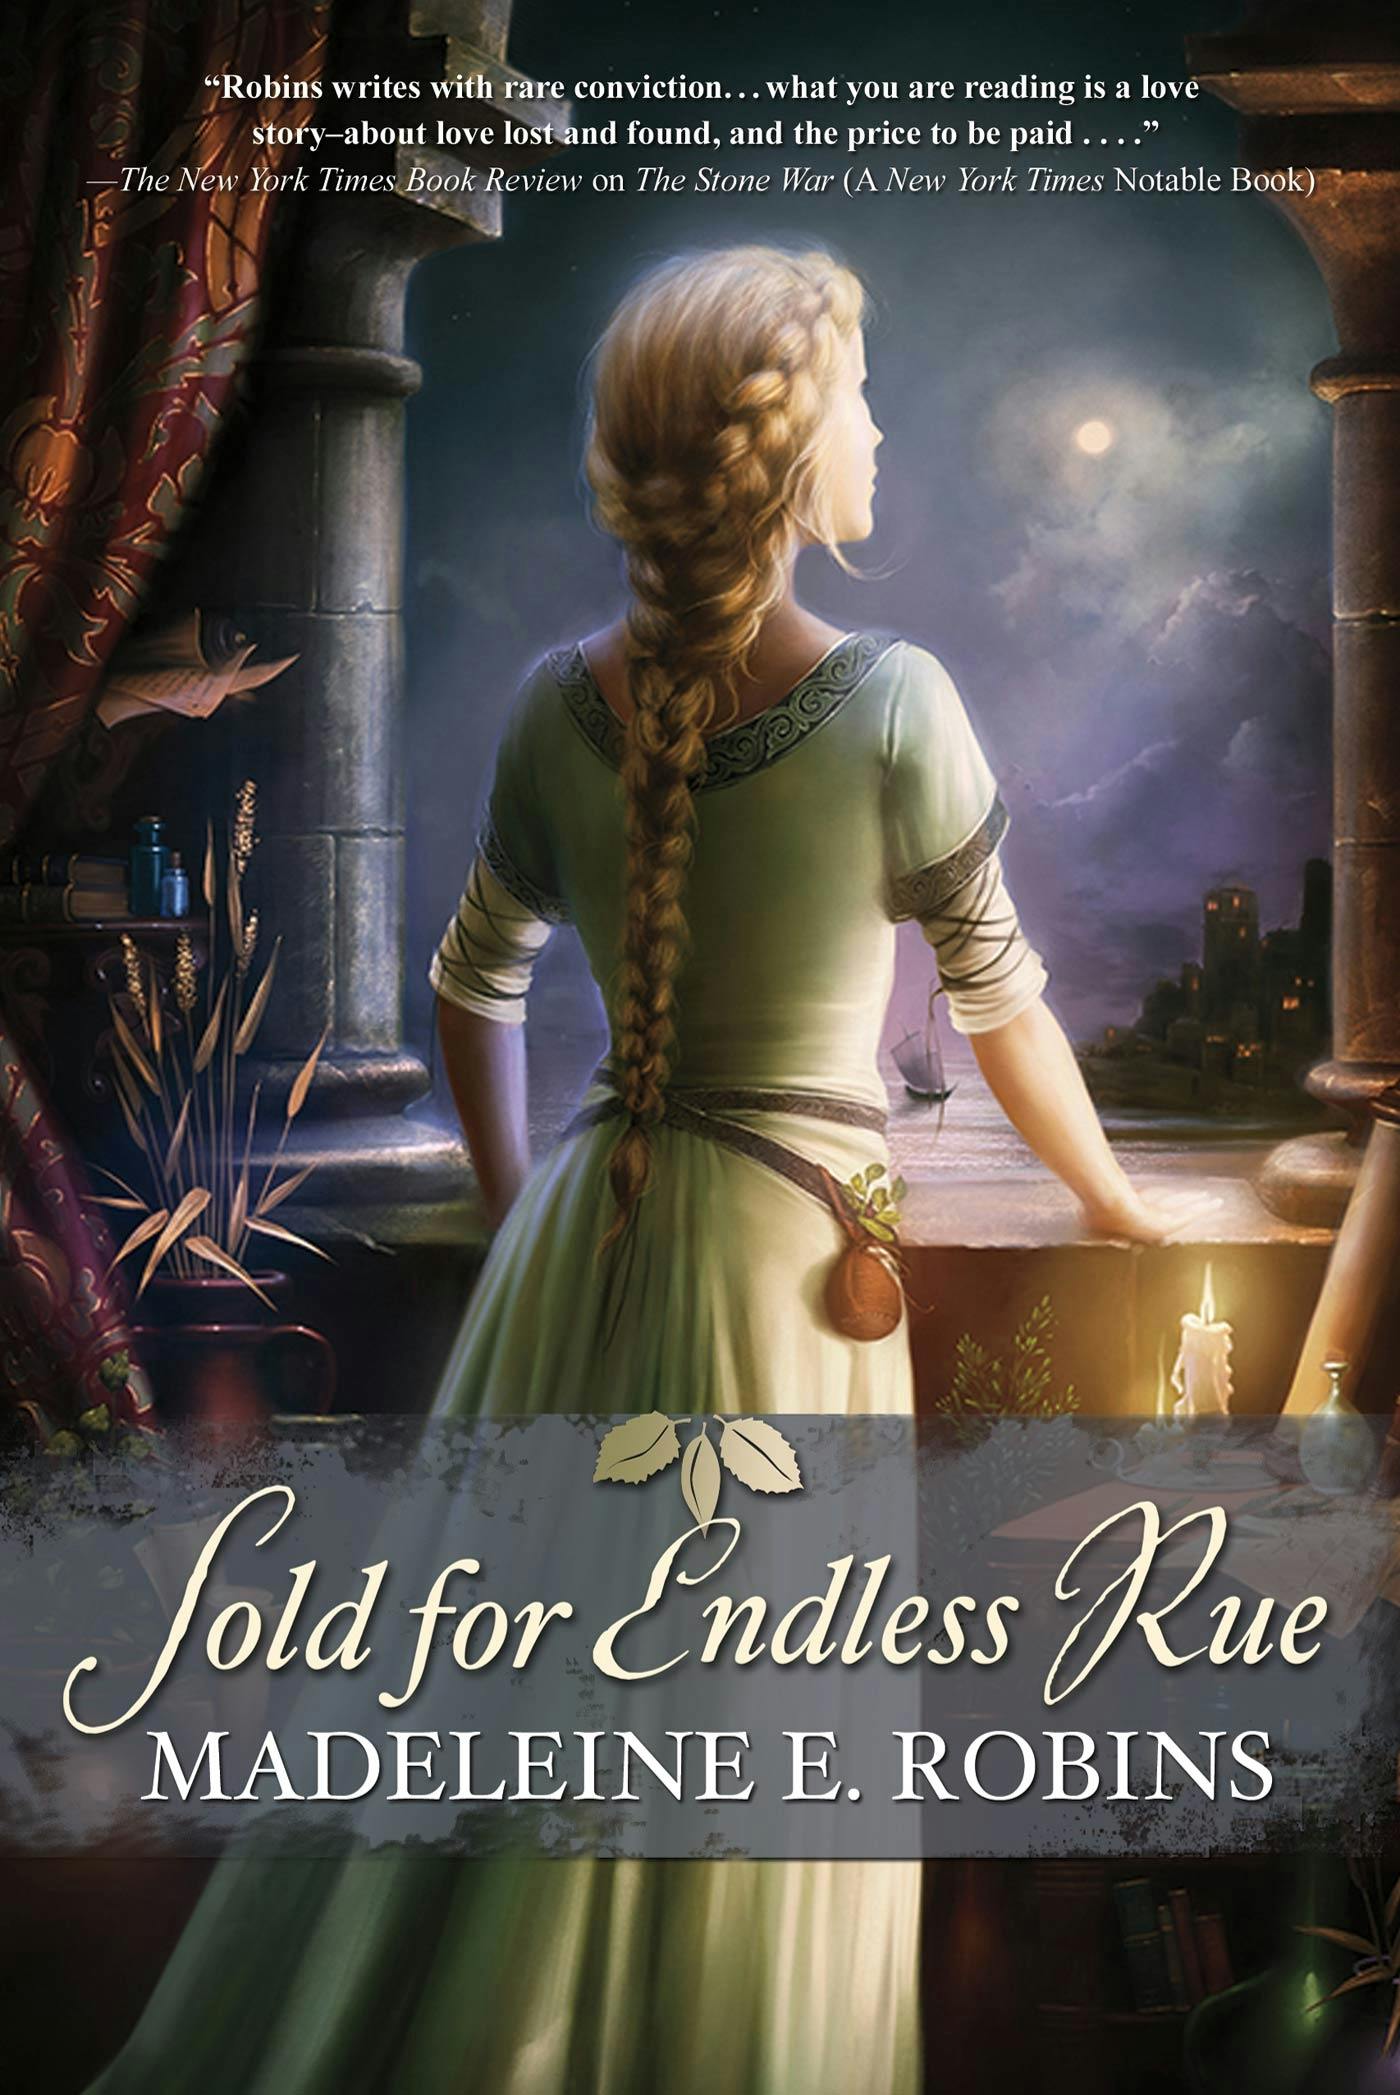 Cover for the book titled as: Sold for Endless Rue